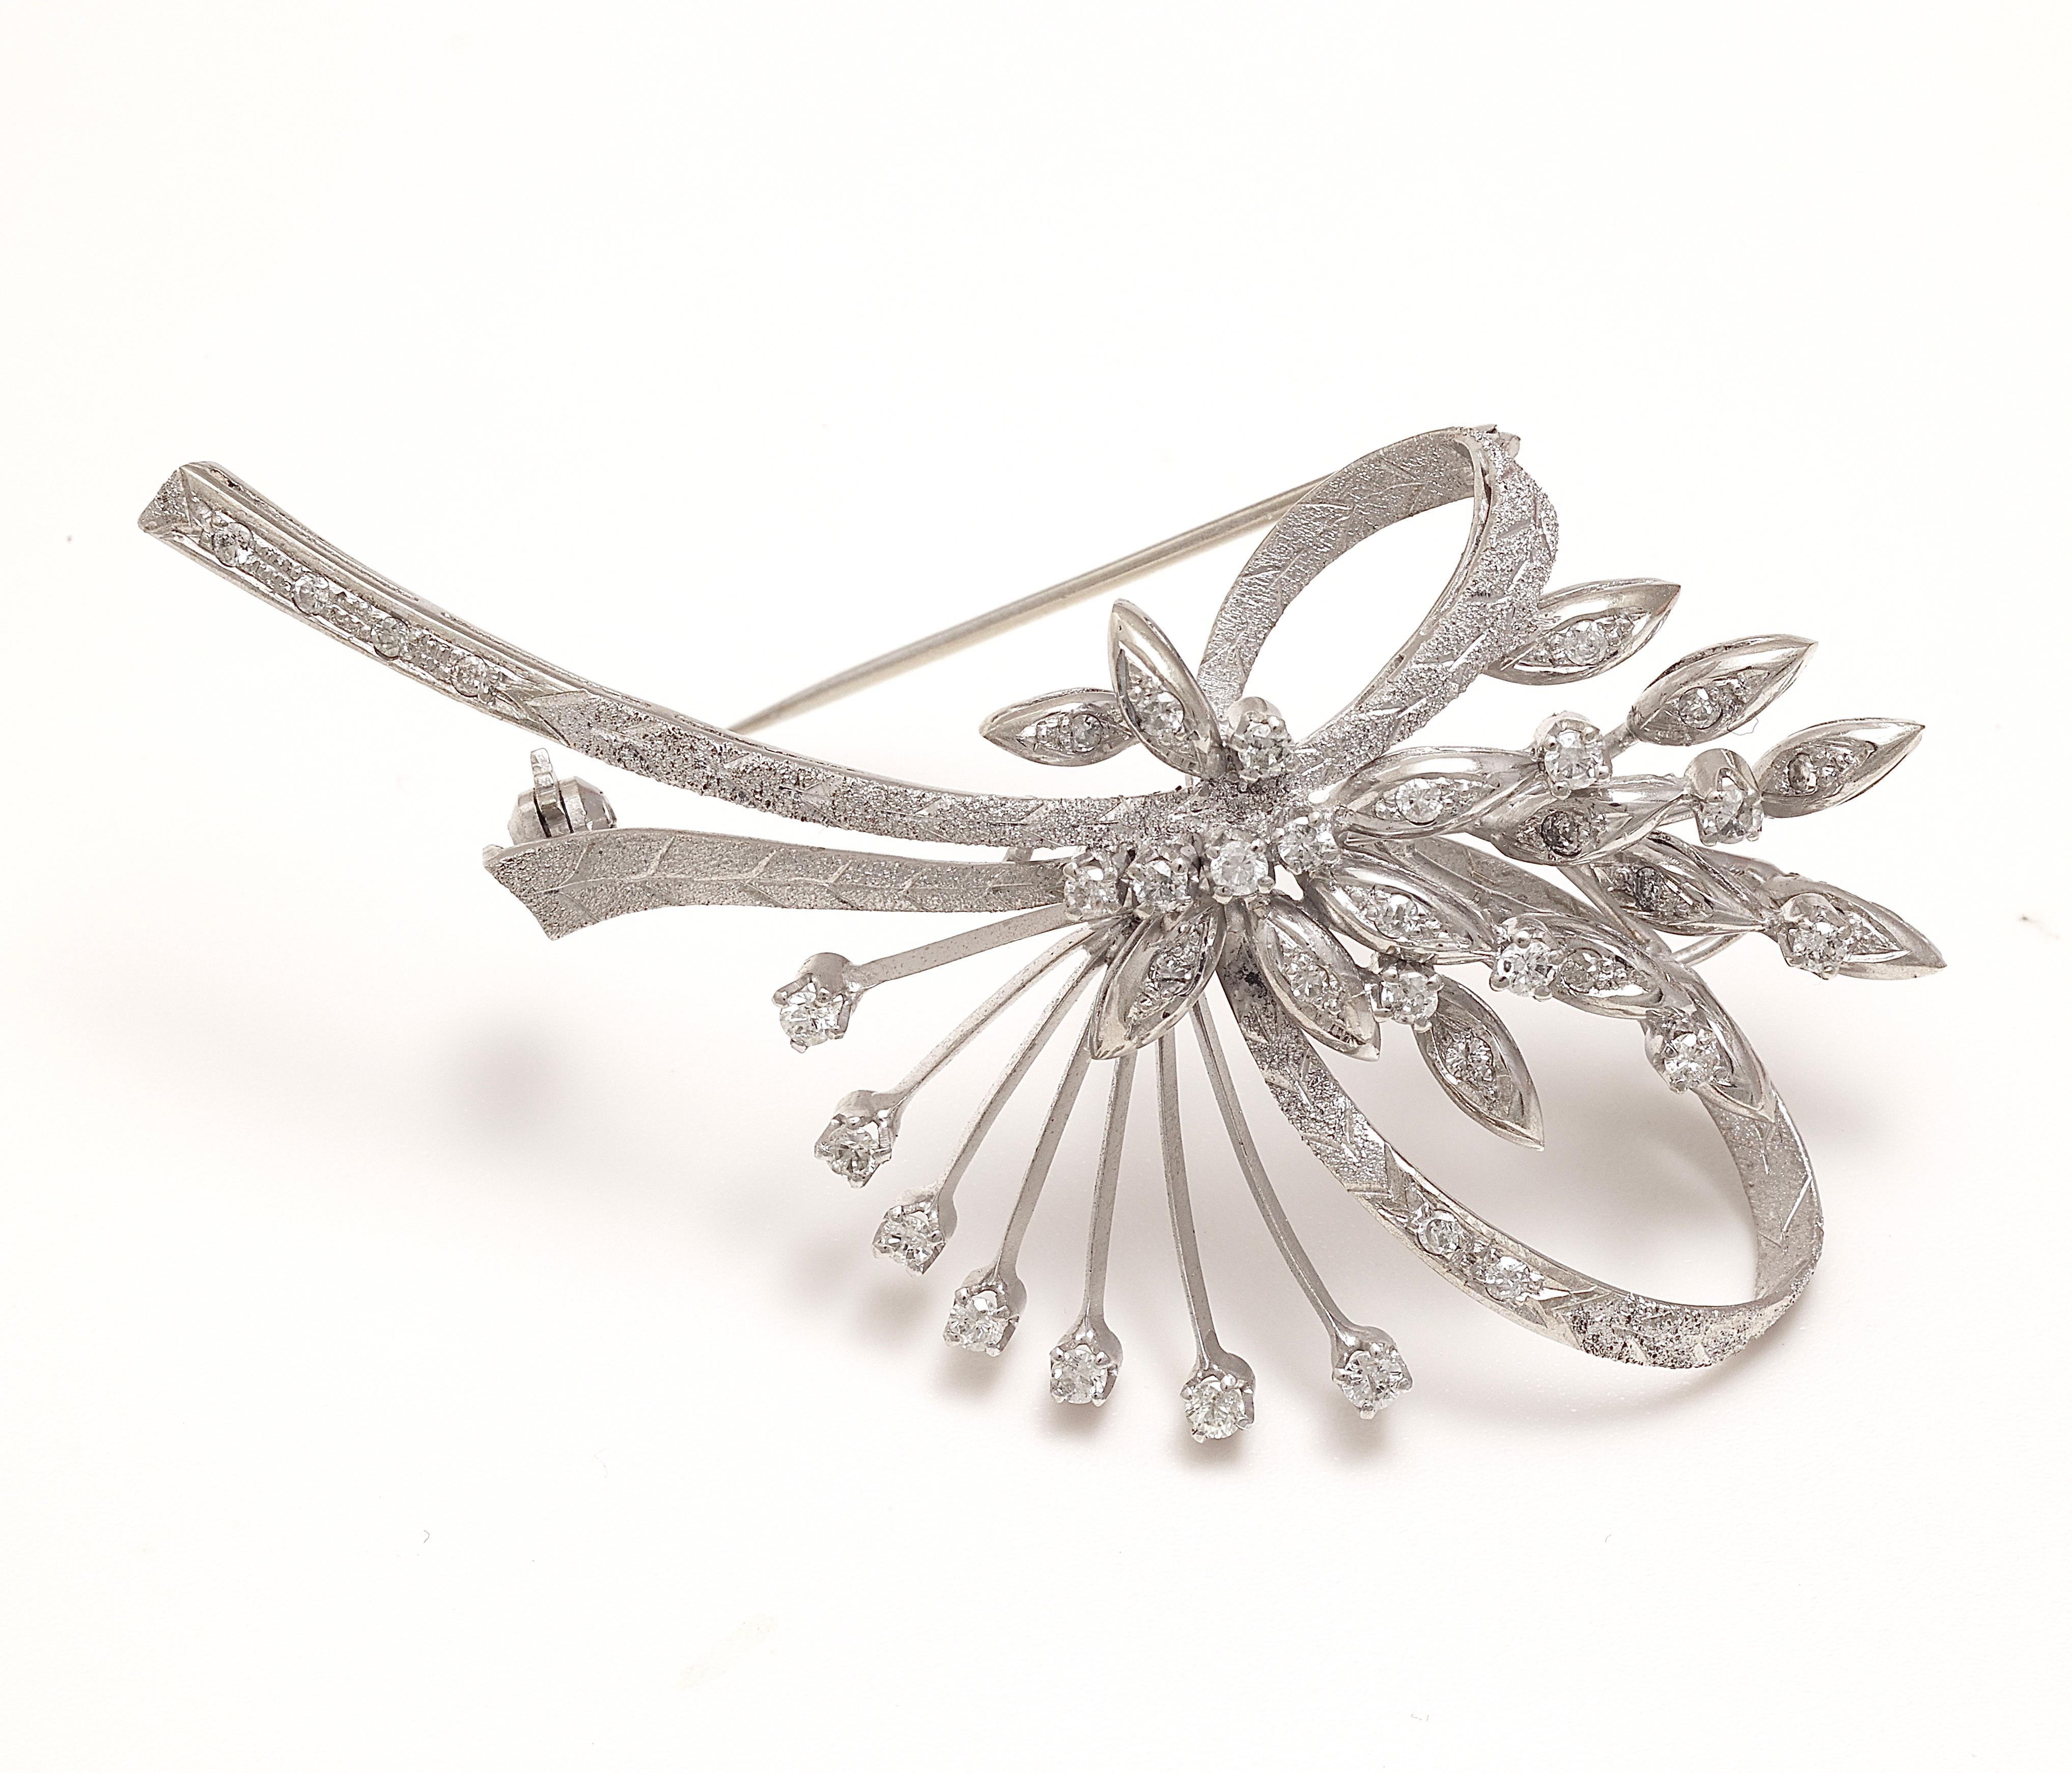  18 kt. White Gold Brooch with 1.52 ct. Brilliant Cut Diamonds For Sale 2